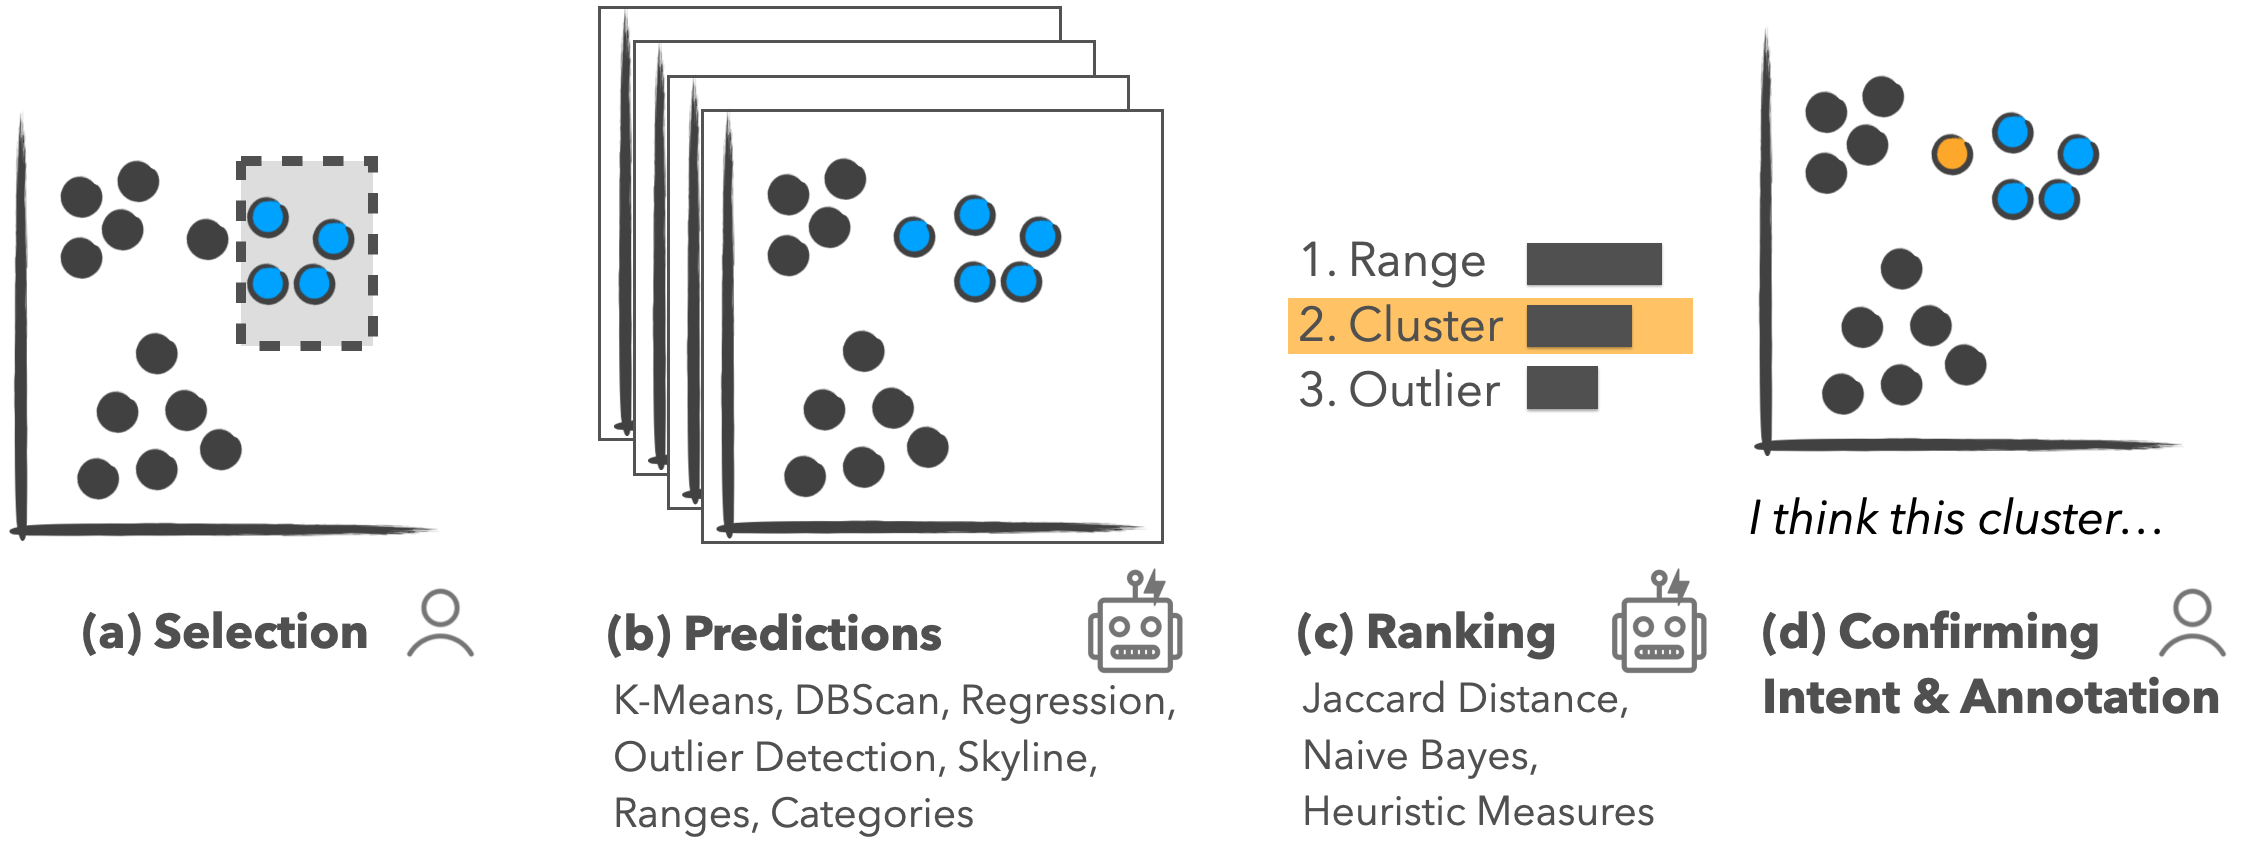 Figure shows the techinque for predicting intent. First step shows a scatterplot with a brush selection, captioned 'Selection' with a small human silhouette. Second step shows stacked scatterplots with a cluster selected. The caption reads 'Predictions' with small robot face. Third step shows list of three patters - Range, cluster and outlier with bars beside each to show ranking. Cluster pattern is selected with orange background. The caption reads 'Ranking' and shows a small robot face. The fourth step shows a scatterplot with a cluster selected. One of the points is highlighted in orange. The caption reads 'Confirming intent & annotation' with a human silhouette.